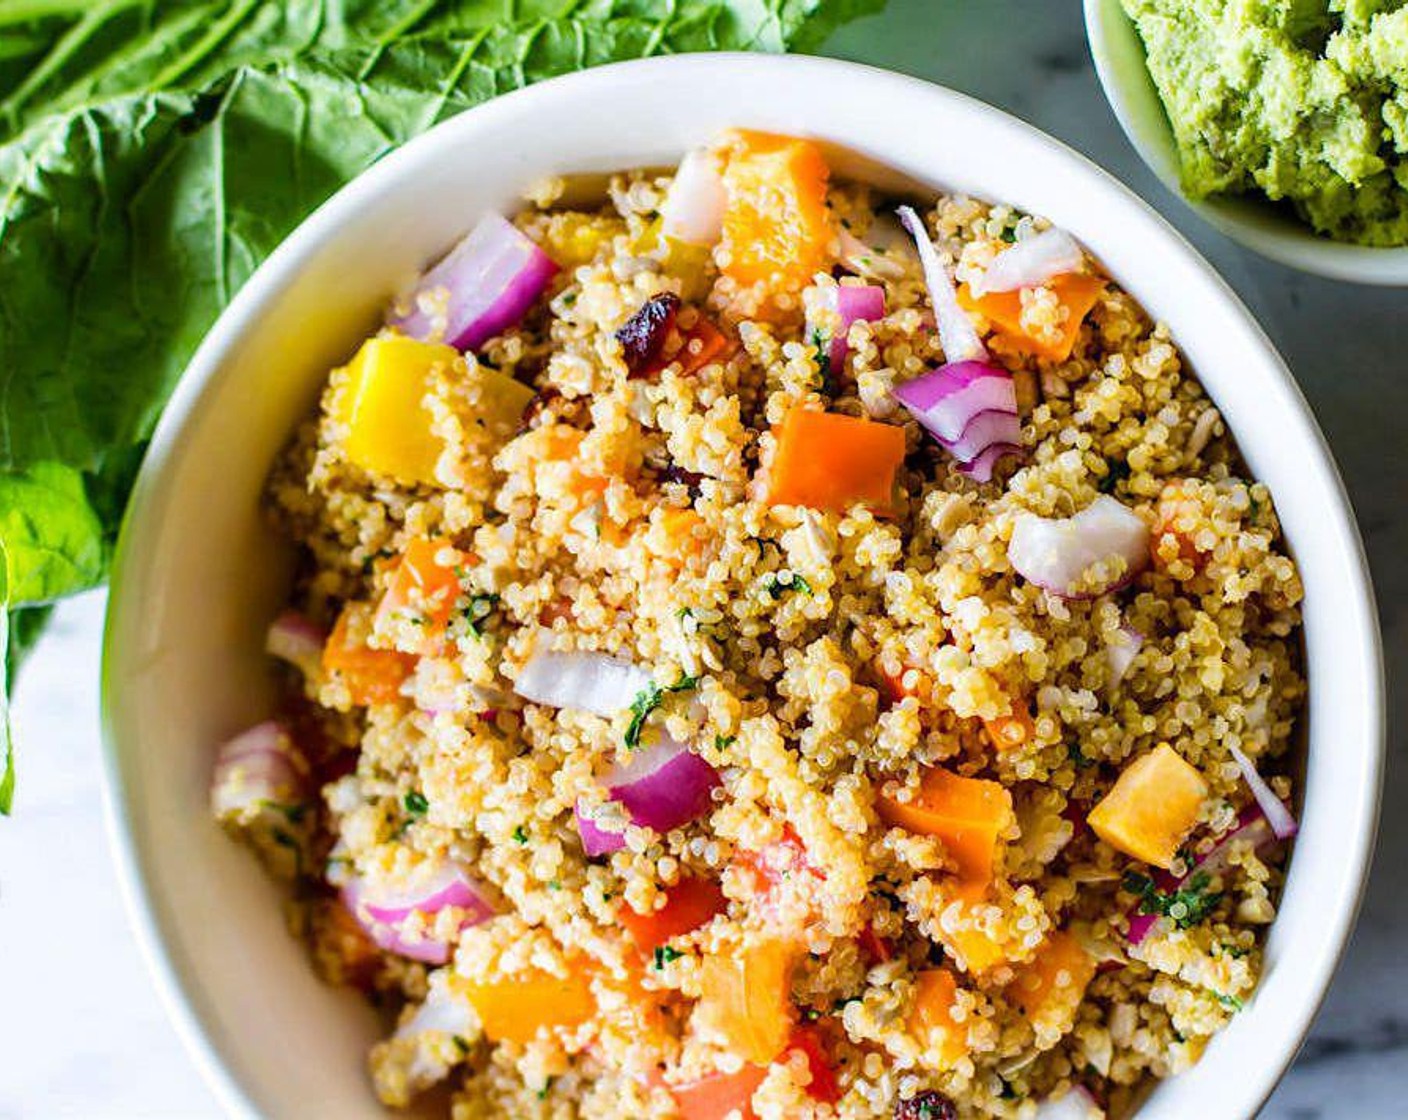 step 5 Combine Red Onion (1/2 cup), Roma Tomato (1), Red Bell Pepper (1/2 cup), and Mango (1/2 cup) in a large bowl with the Quinoa (2 cups). Add Dried Cranberries (1/3 cup), Sunflower Seeds (1/3 cup), and Fresh Cilantro (1/4 cup). Toss all together.